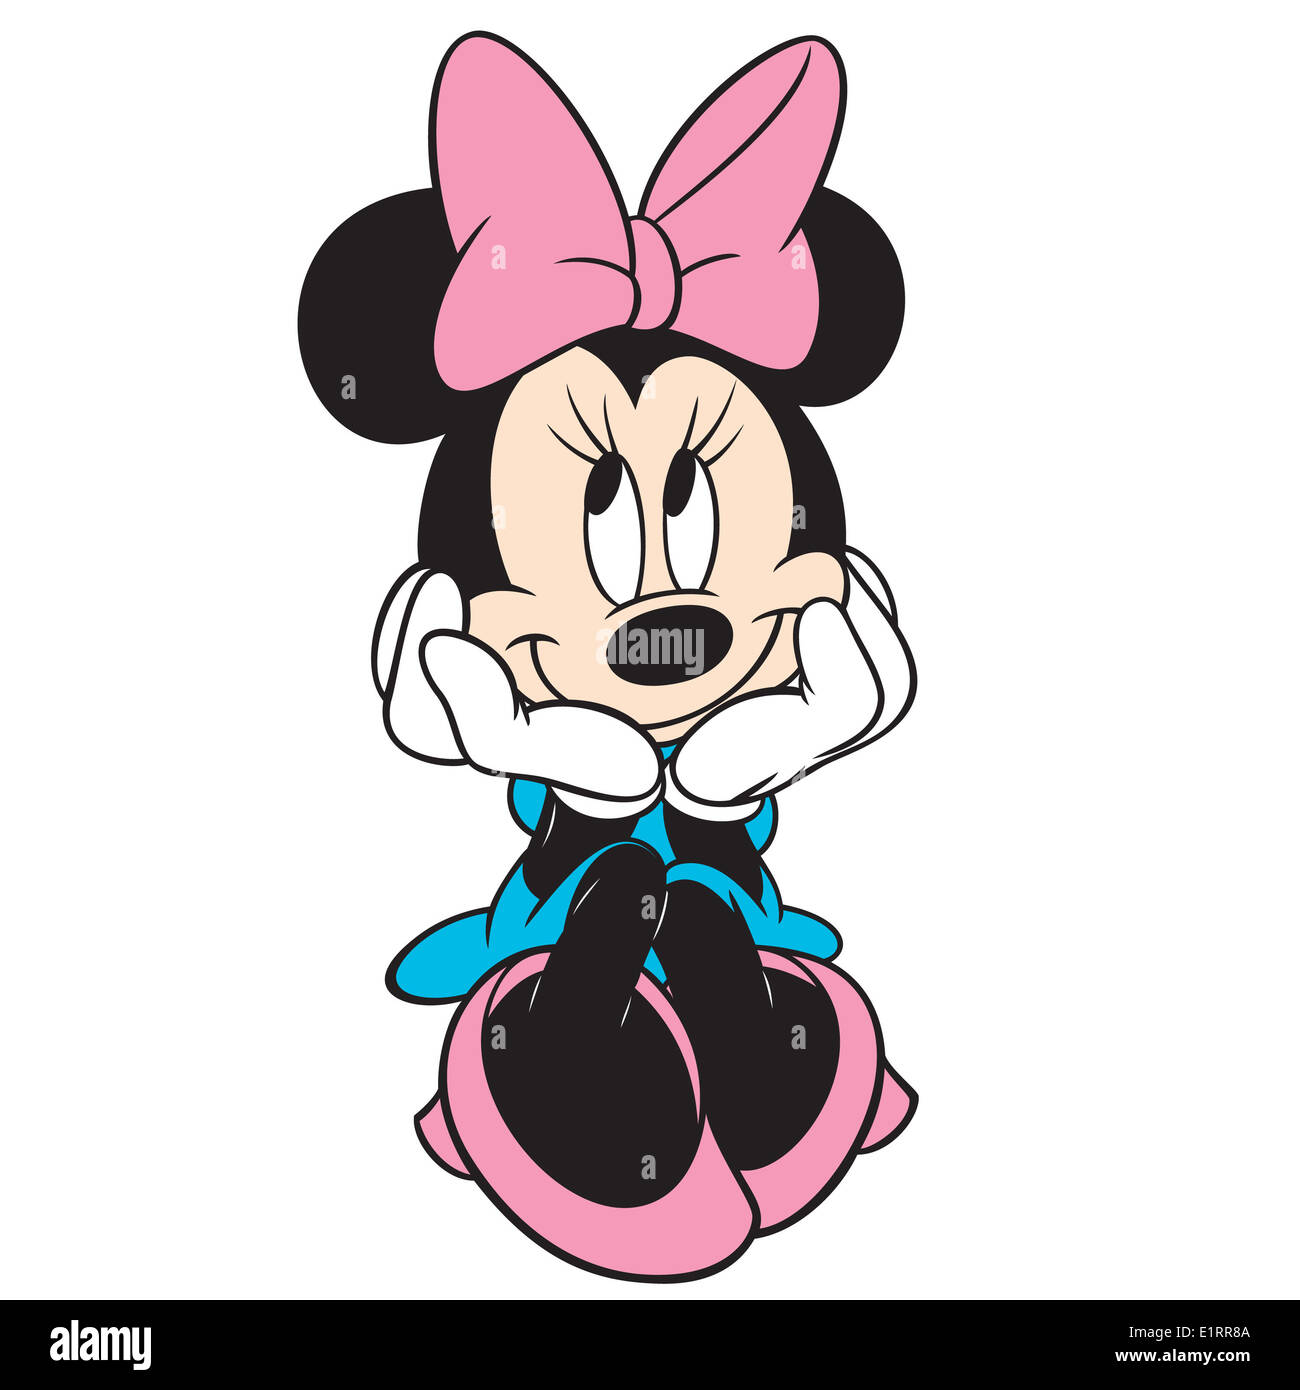 Minnie Mouse Cartoon High Resolution Stock Photography and Images - Alamy